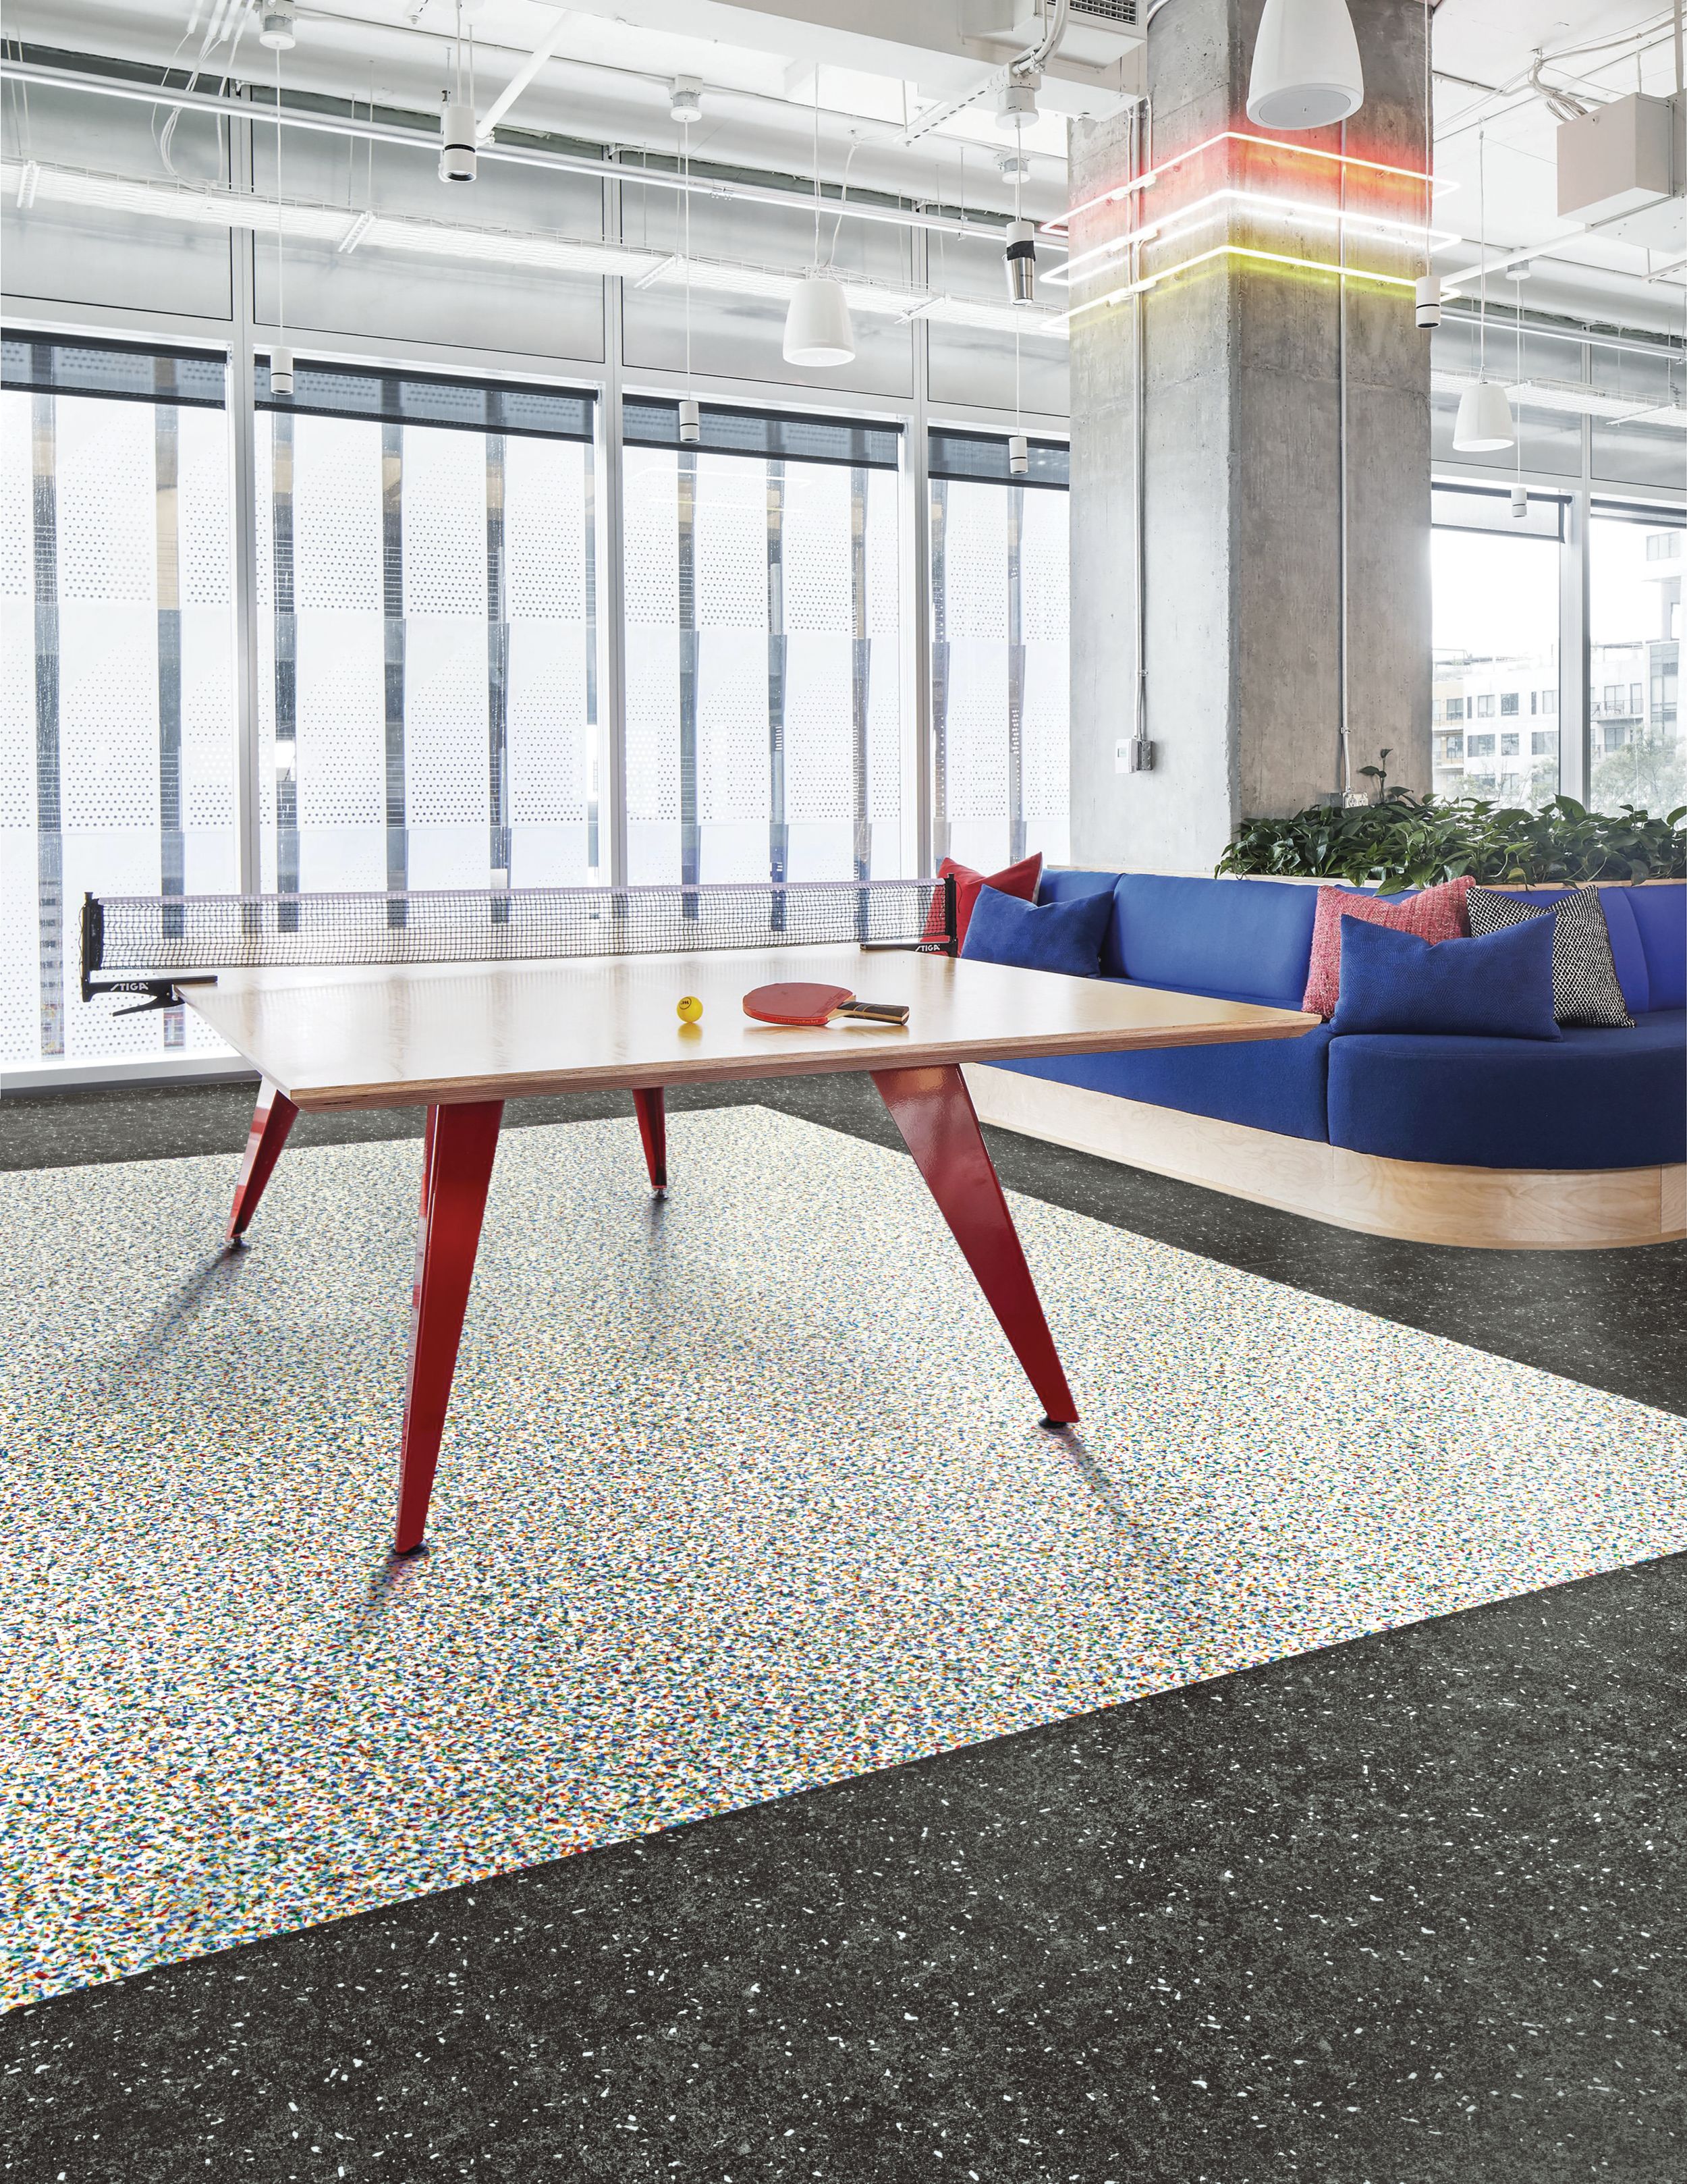 Interface Walk on By, Polychrome and Walk the Aisle LVT in a lobby space Bildnummer 9